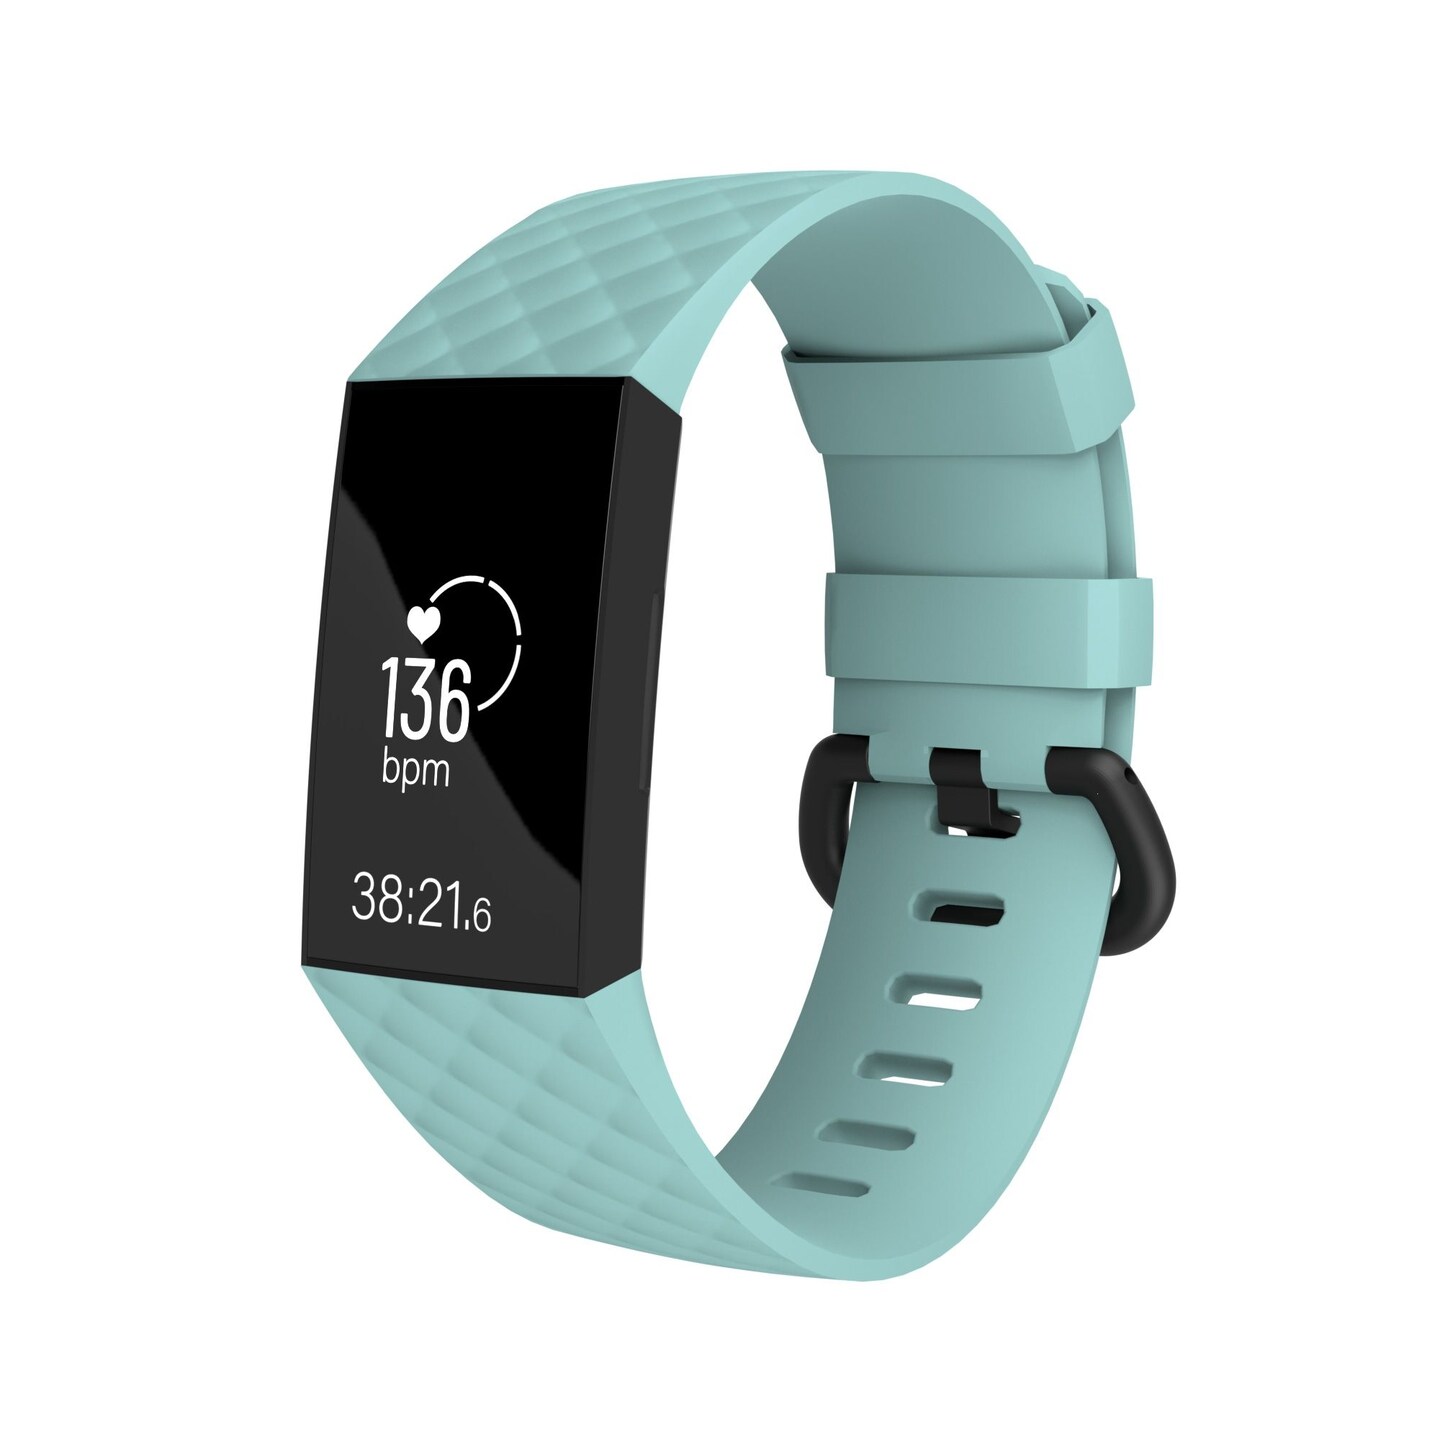 Zodaca Silicone Watch Band Compatible with Fitbit Charge 3, Charge 3 SE (Small), and Charge 4, Fitness Tracker Replacement Bands, Mint Green